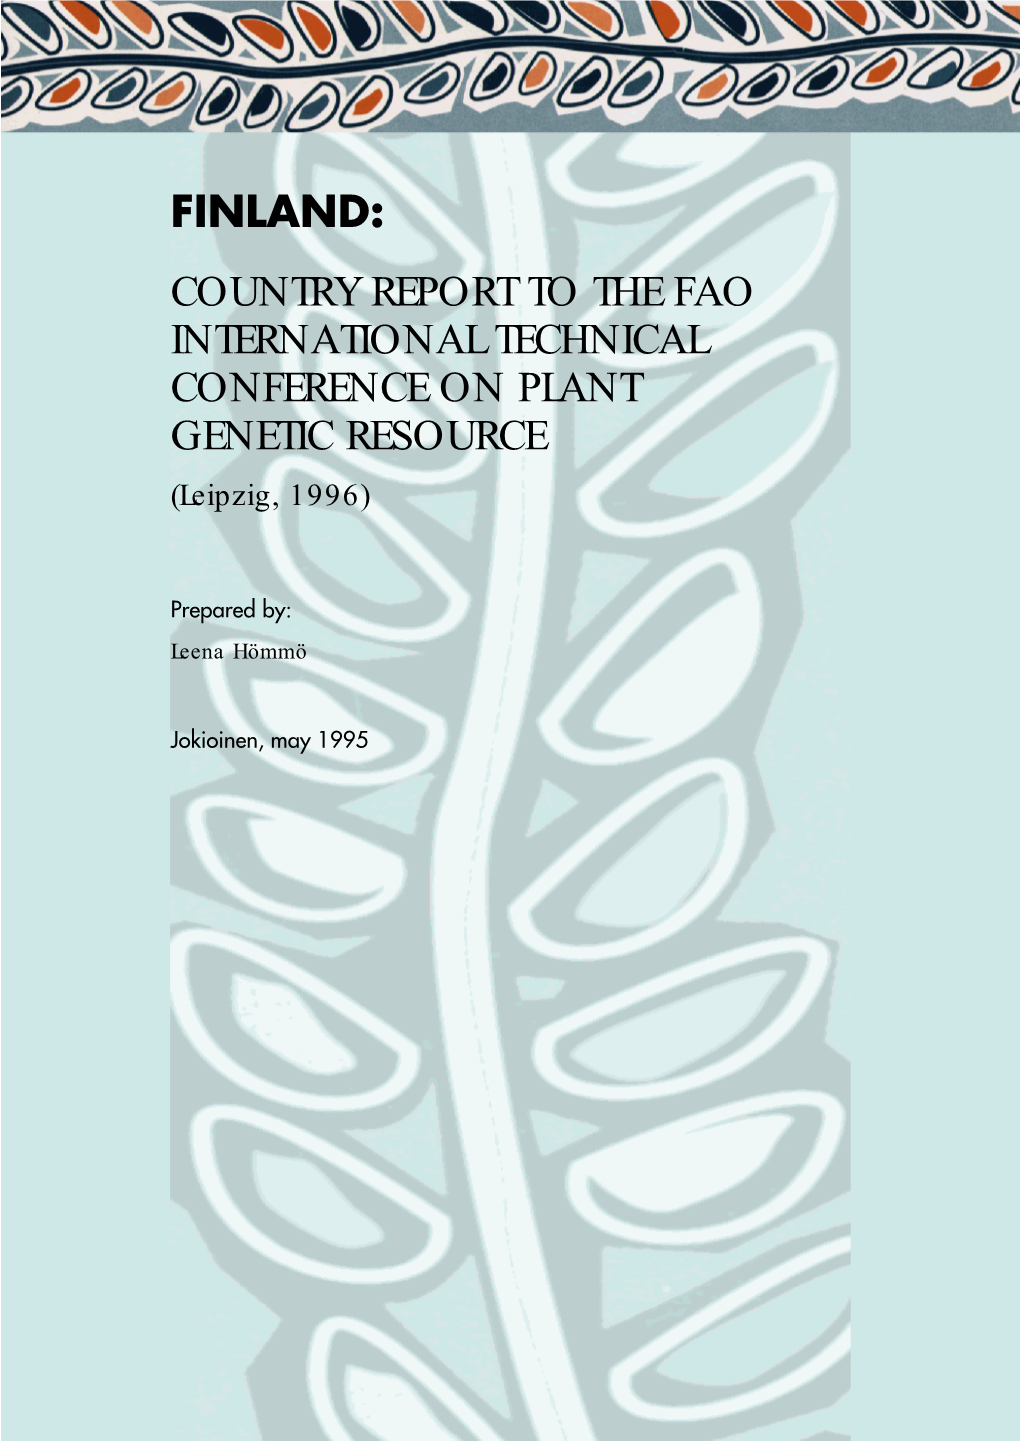 FINLAND: COUNTRY REPORT to the FAO INTERNATIONAL TECHNICAL CONFERENCE on PLANT GENETIC RESOURCE (Leipzig, 1996)